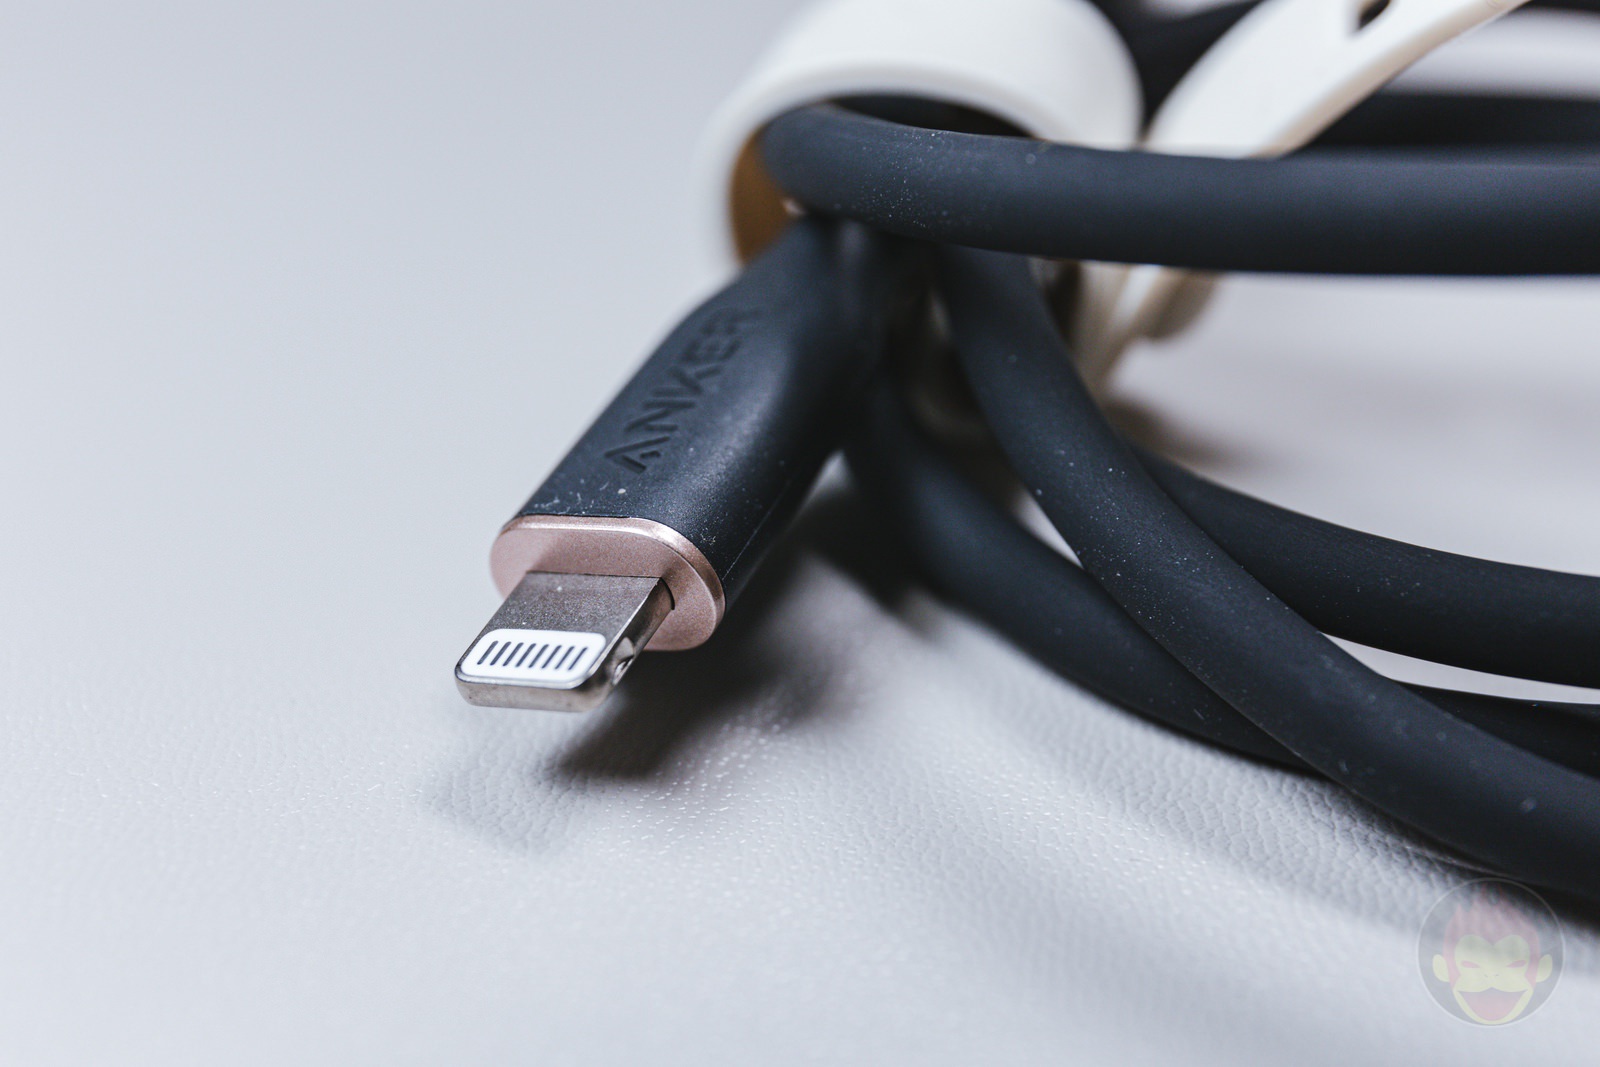 Anker-PowerLine-III-Flow-USBC-to-Lightning-Cable-Review-18.jpg